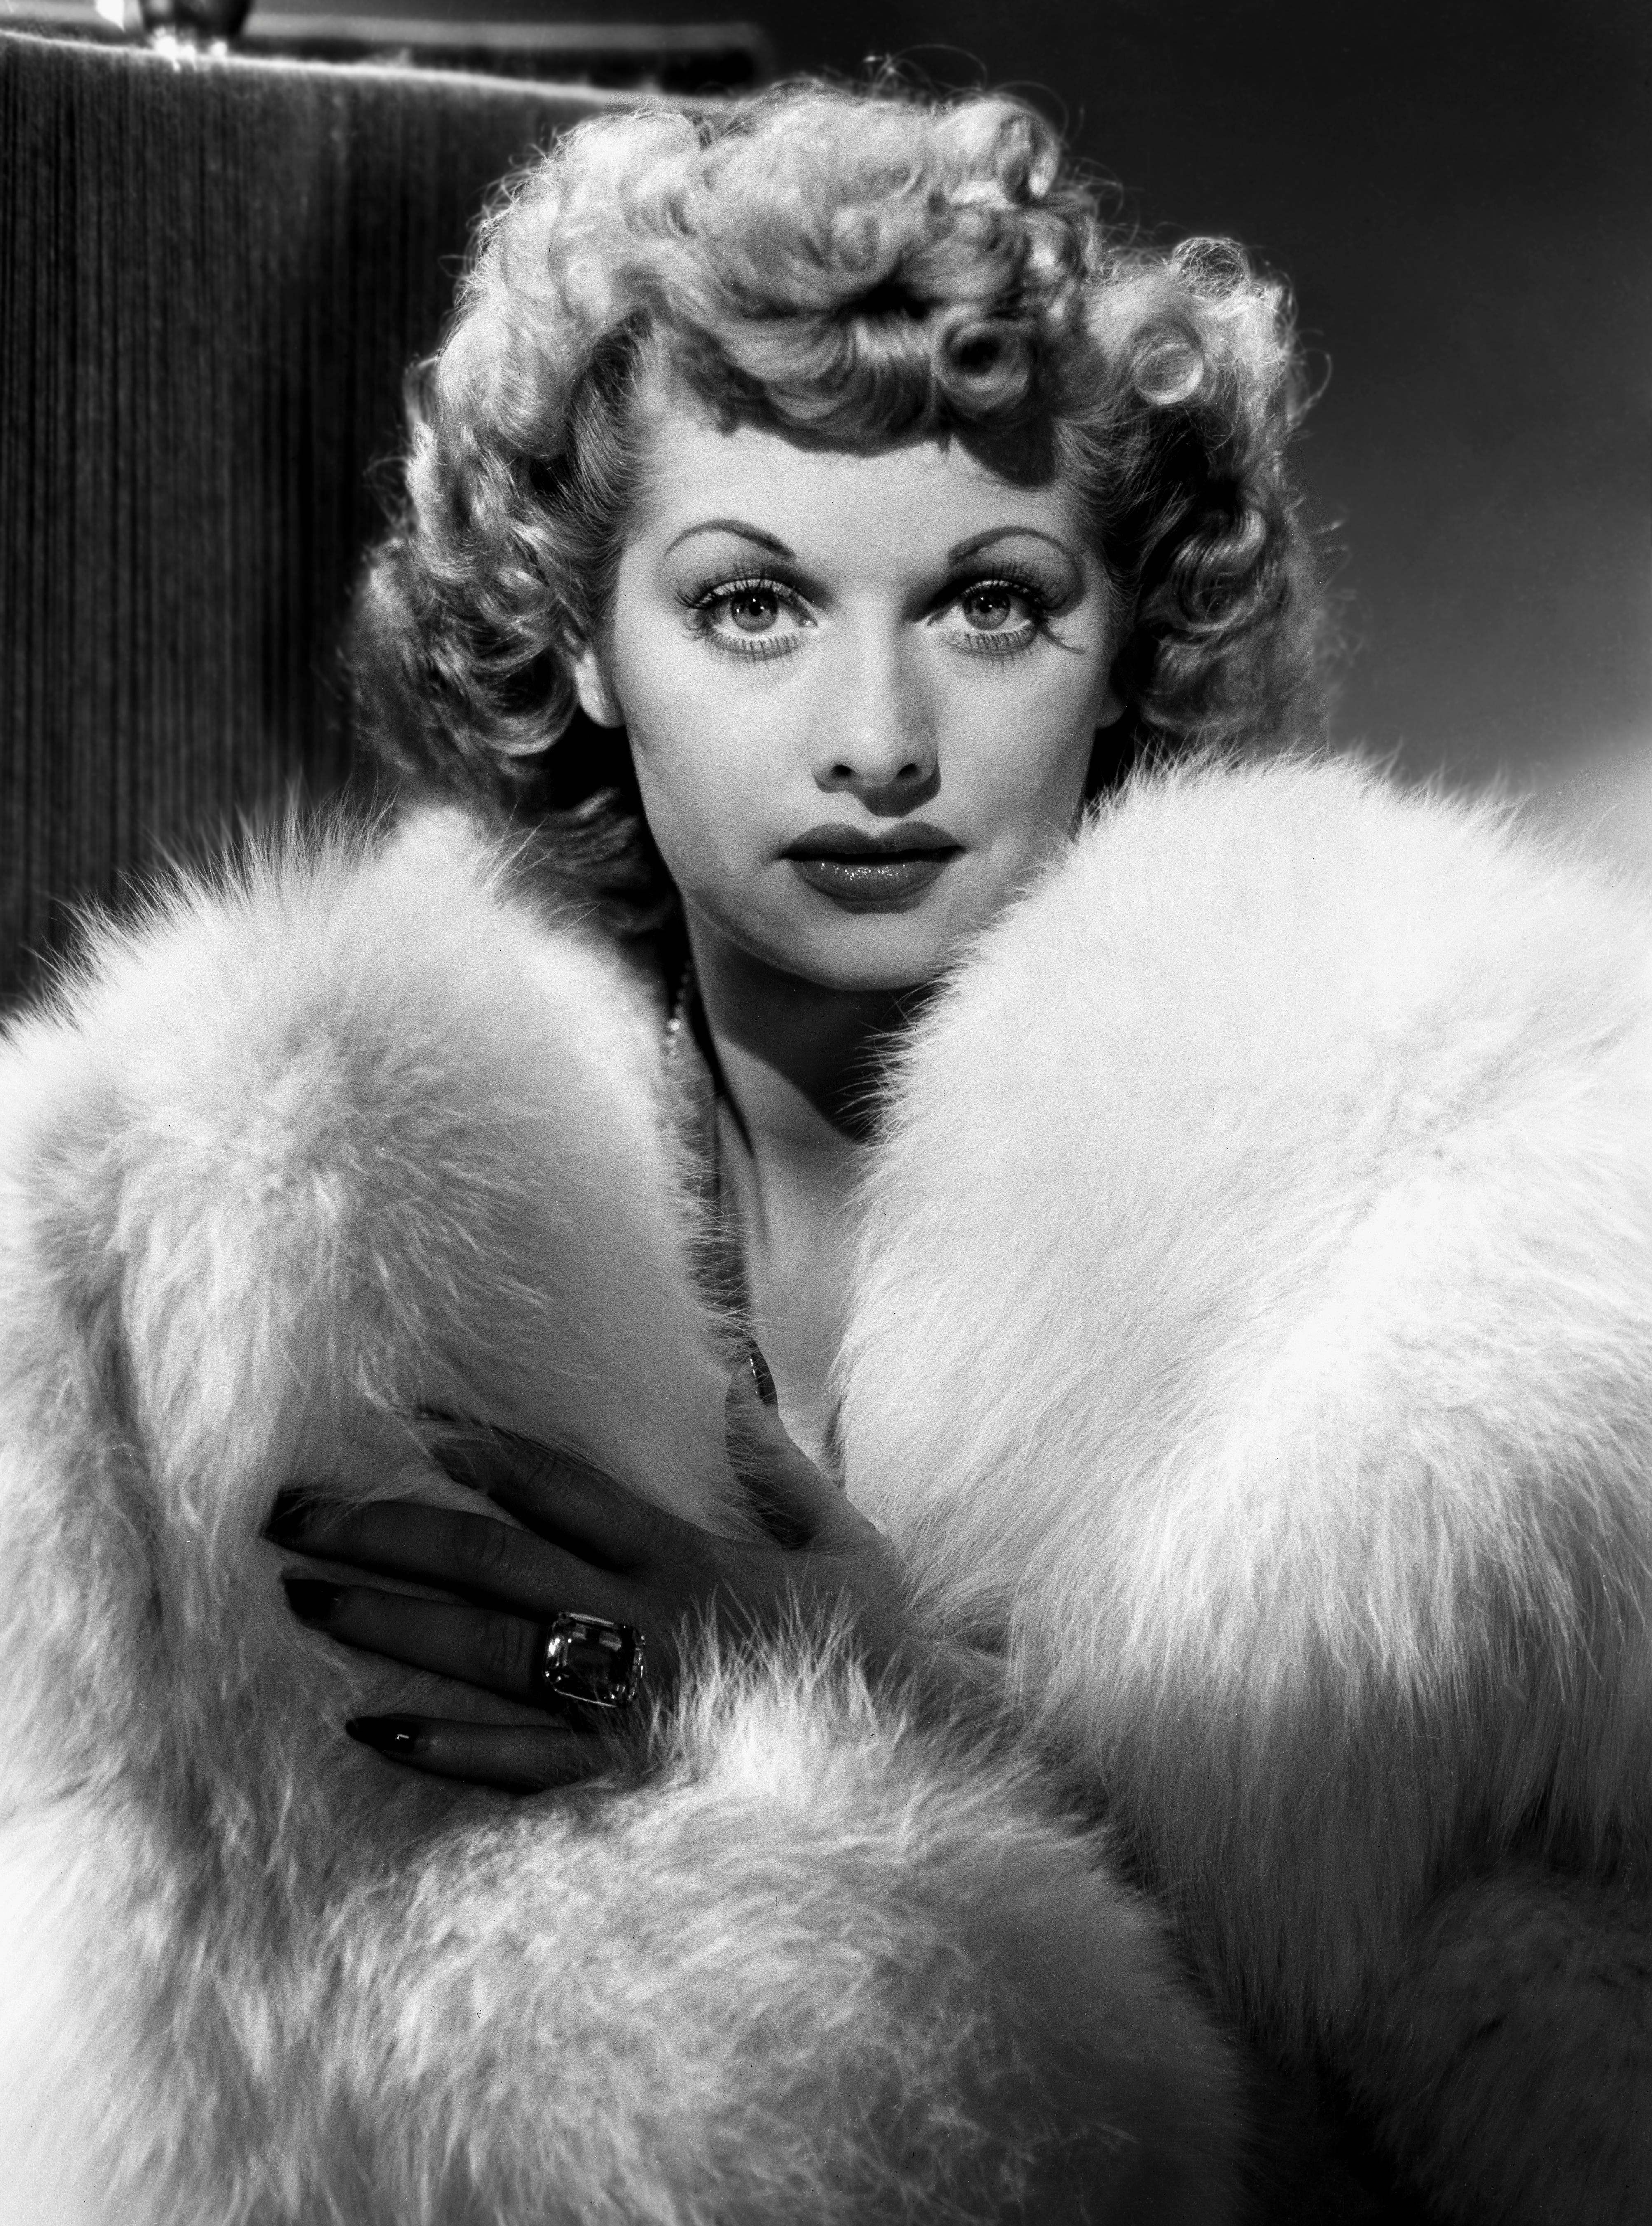 Unknown Black and White Photograph - Lucille Ball Portrait in Fur Movie Star News Fine Art Print